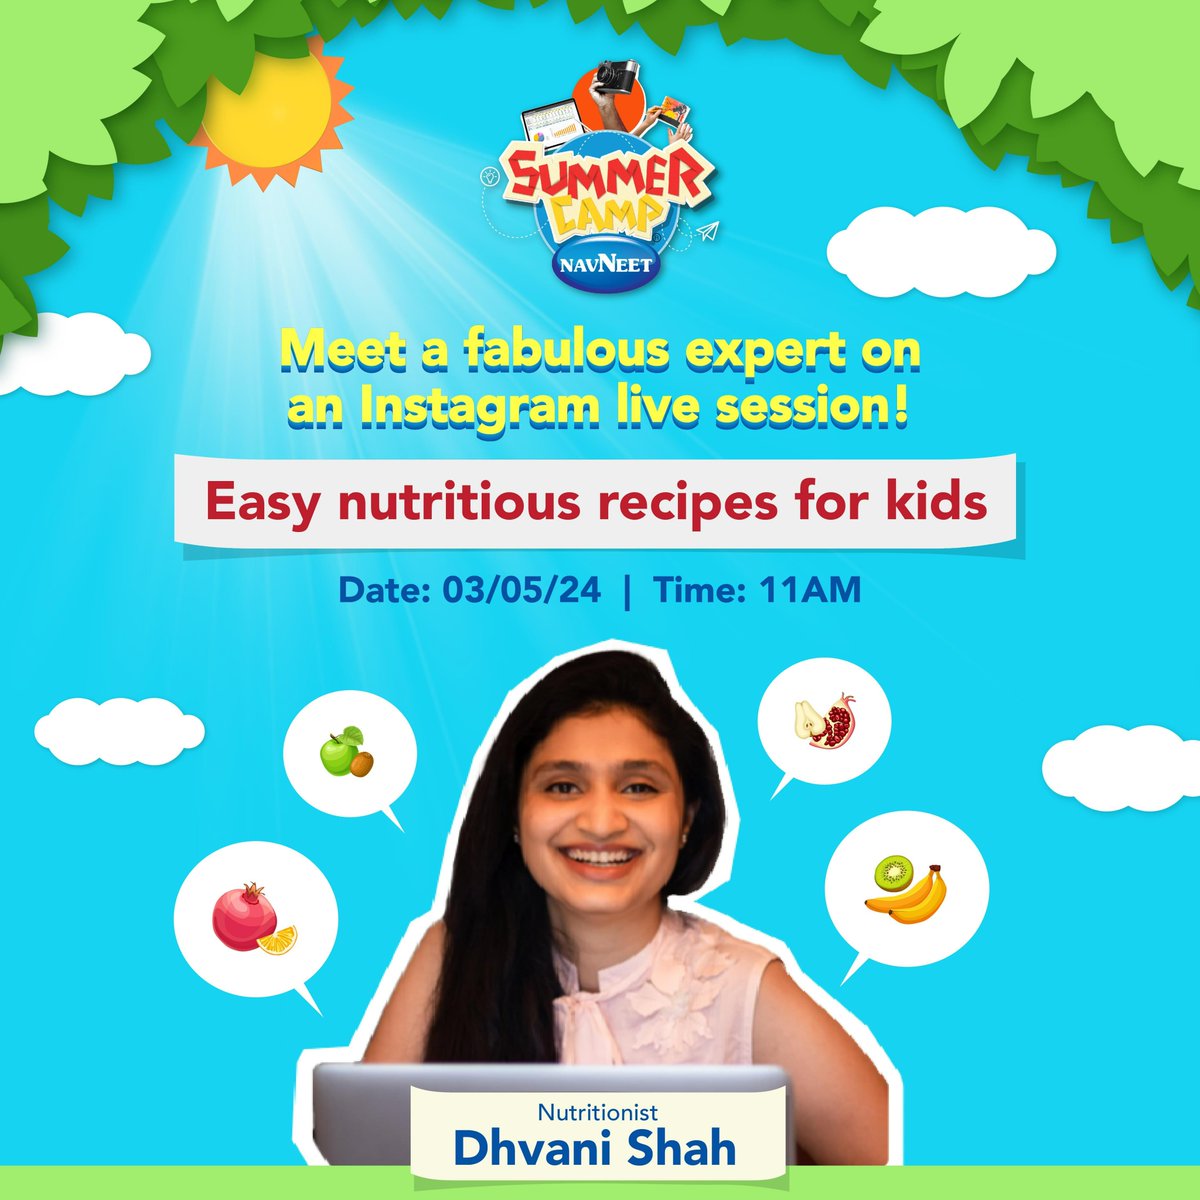 Get ready to have a cooking blast with Dhvani Shah! Join our Instagram Live on May 3rd, 2024, and whip up some super yummy and easy recipes. Let's make cooking fun together!

#NavneetEducation #Navneet #NavneetIndia #Education #summercamp #fun #NavneetSummerCamp